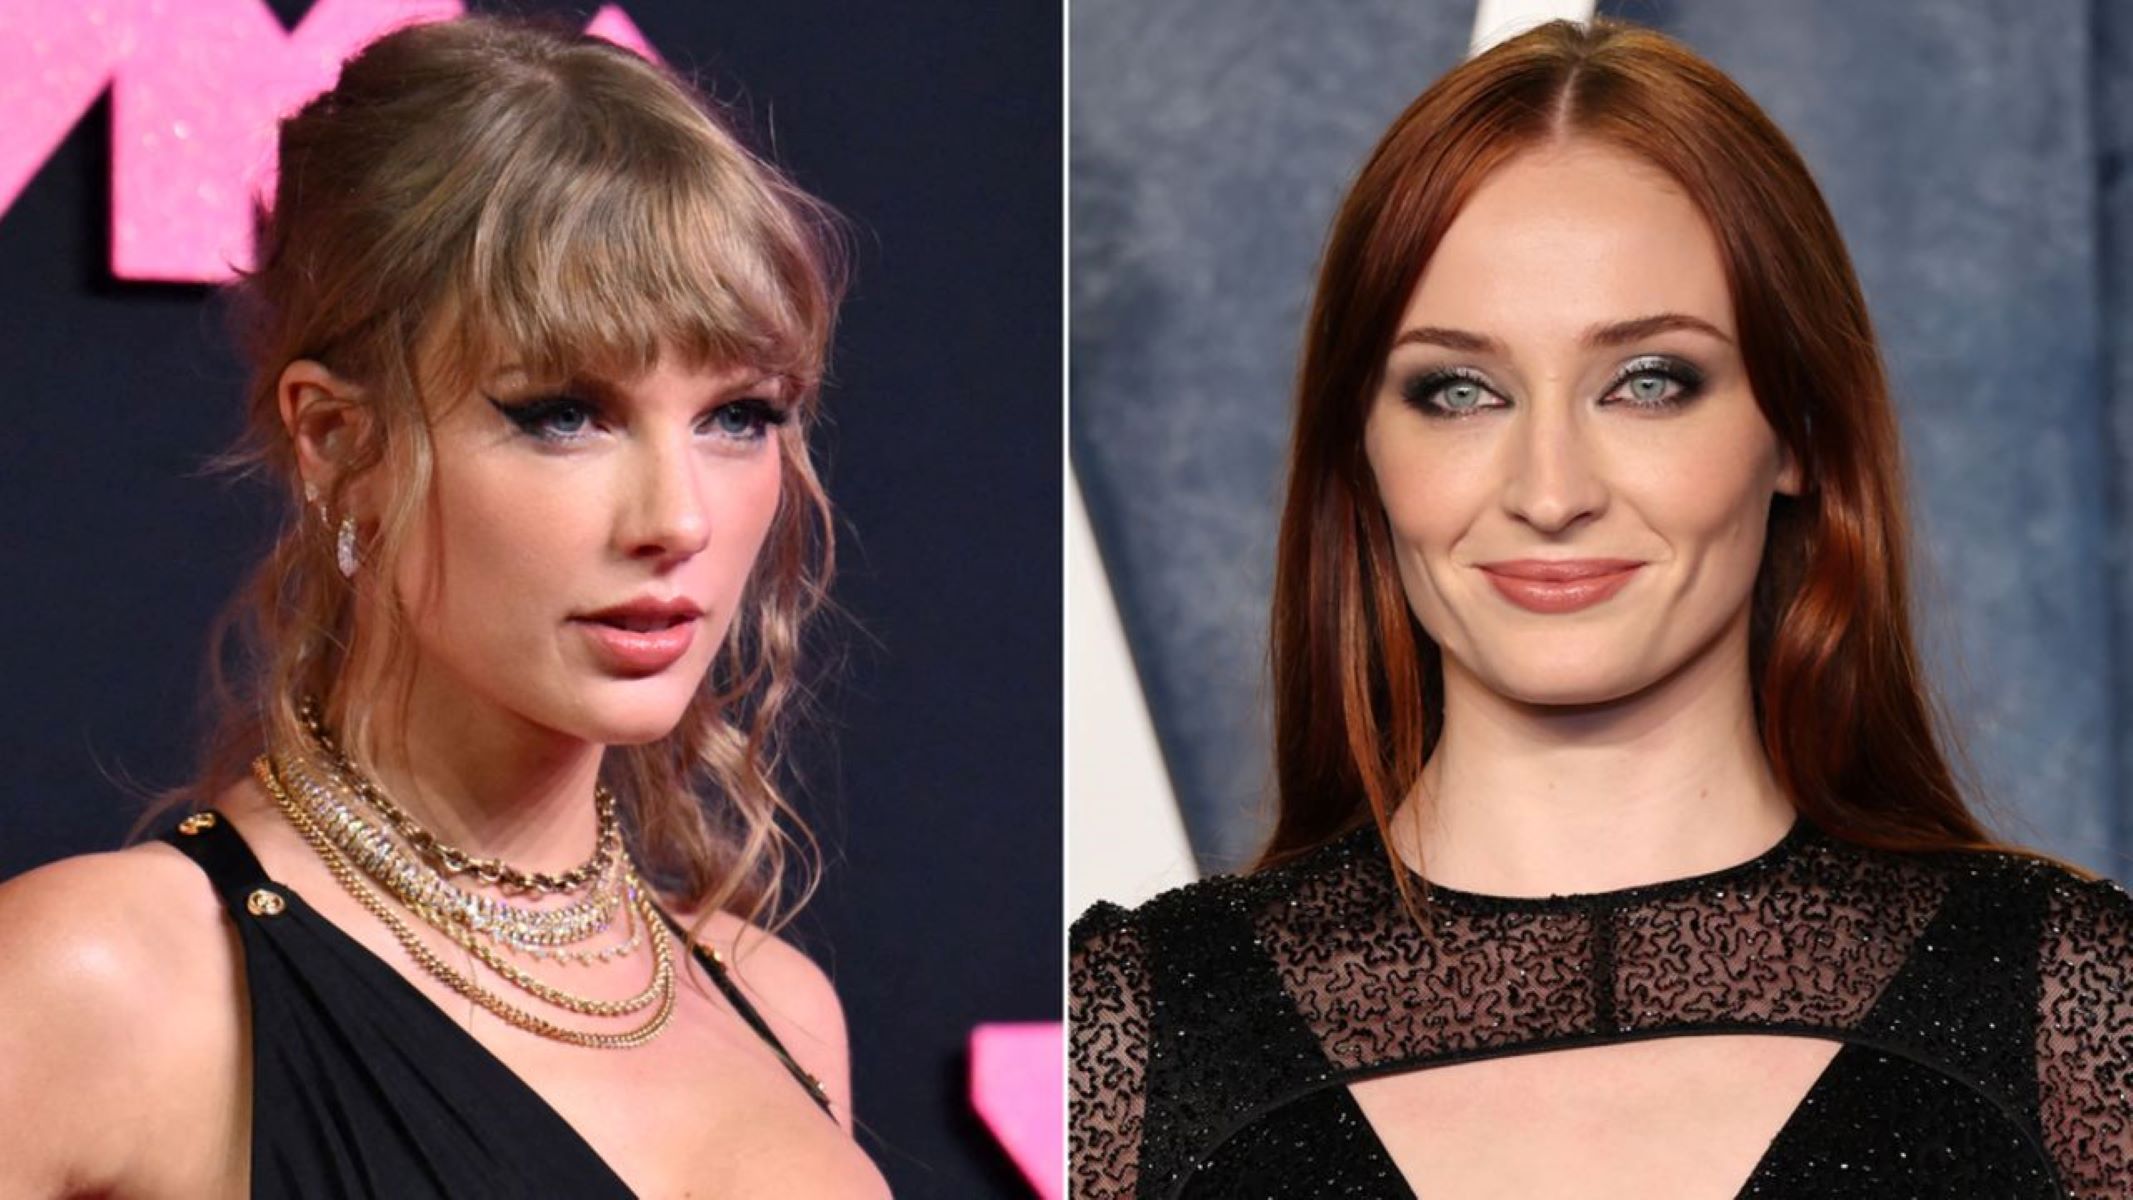 Sophie Turner And Taylor Swift: Friends In New York